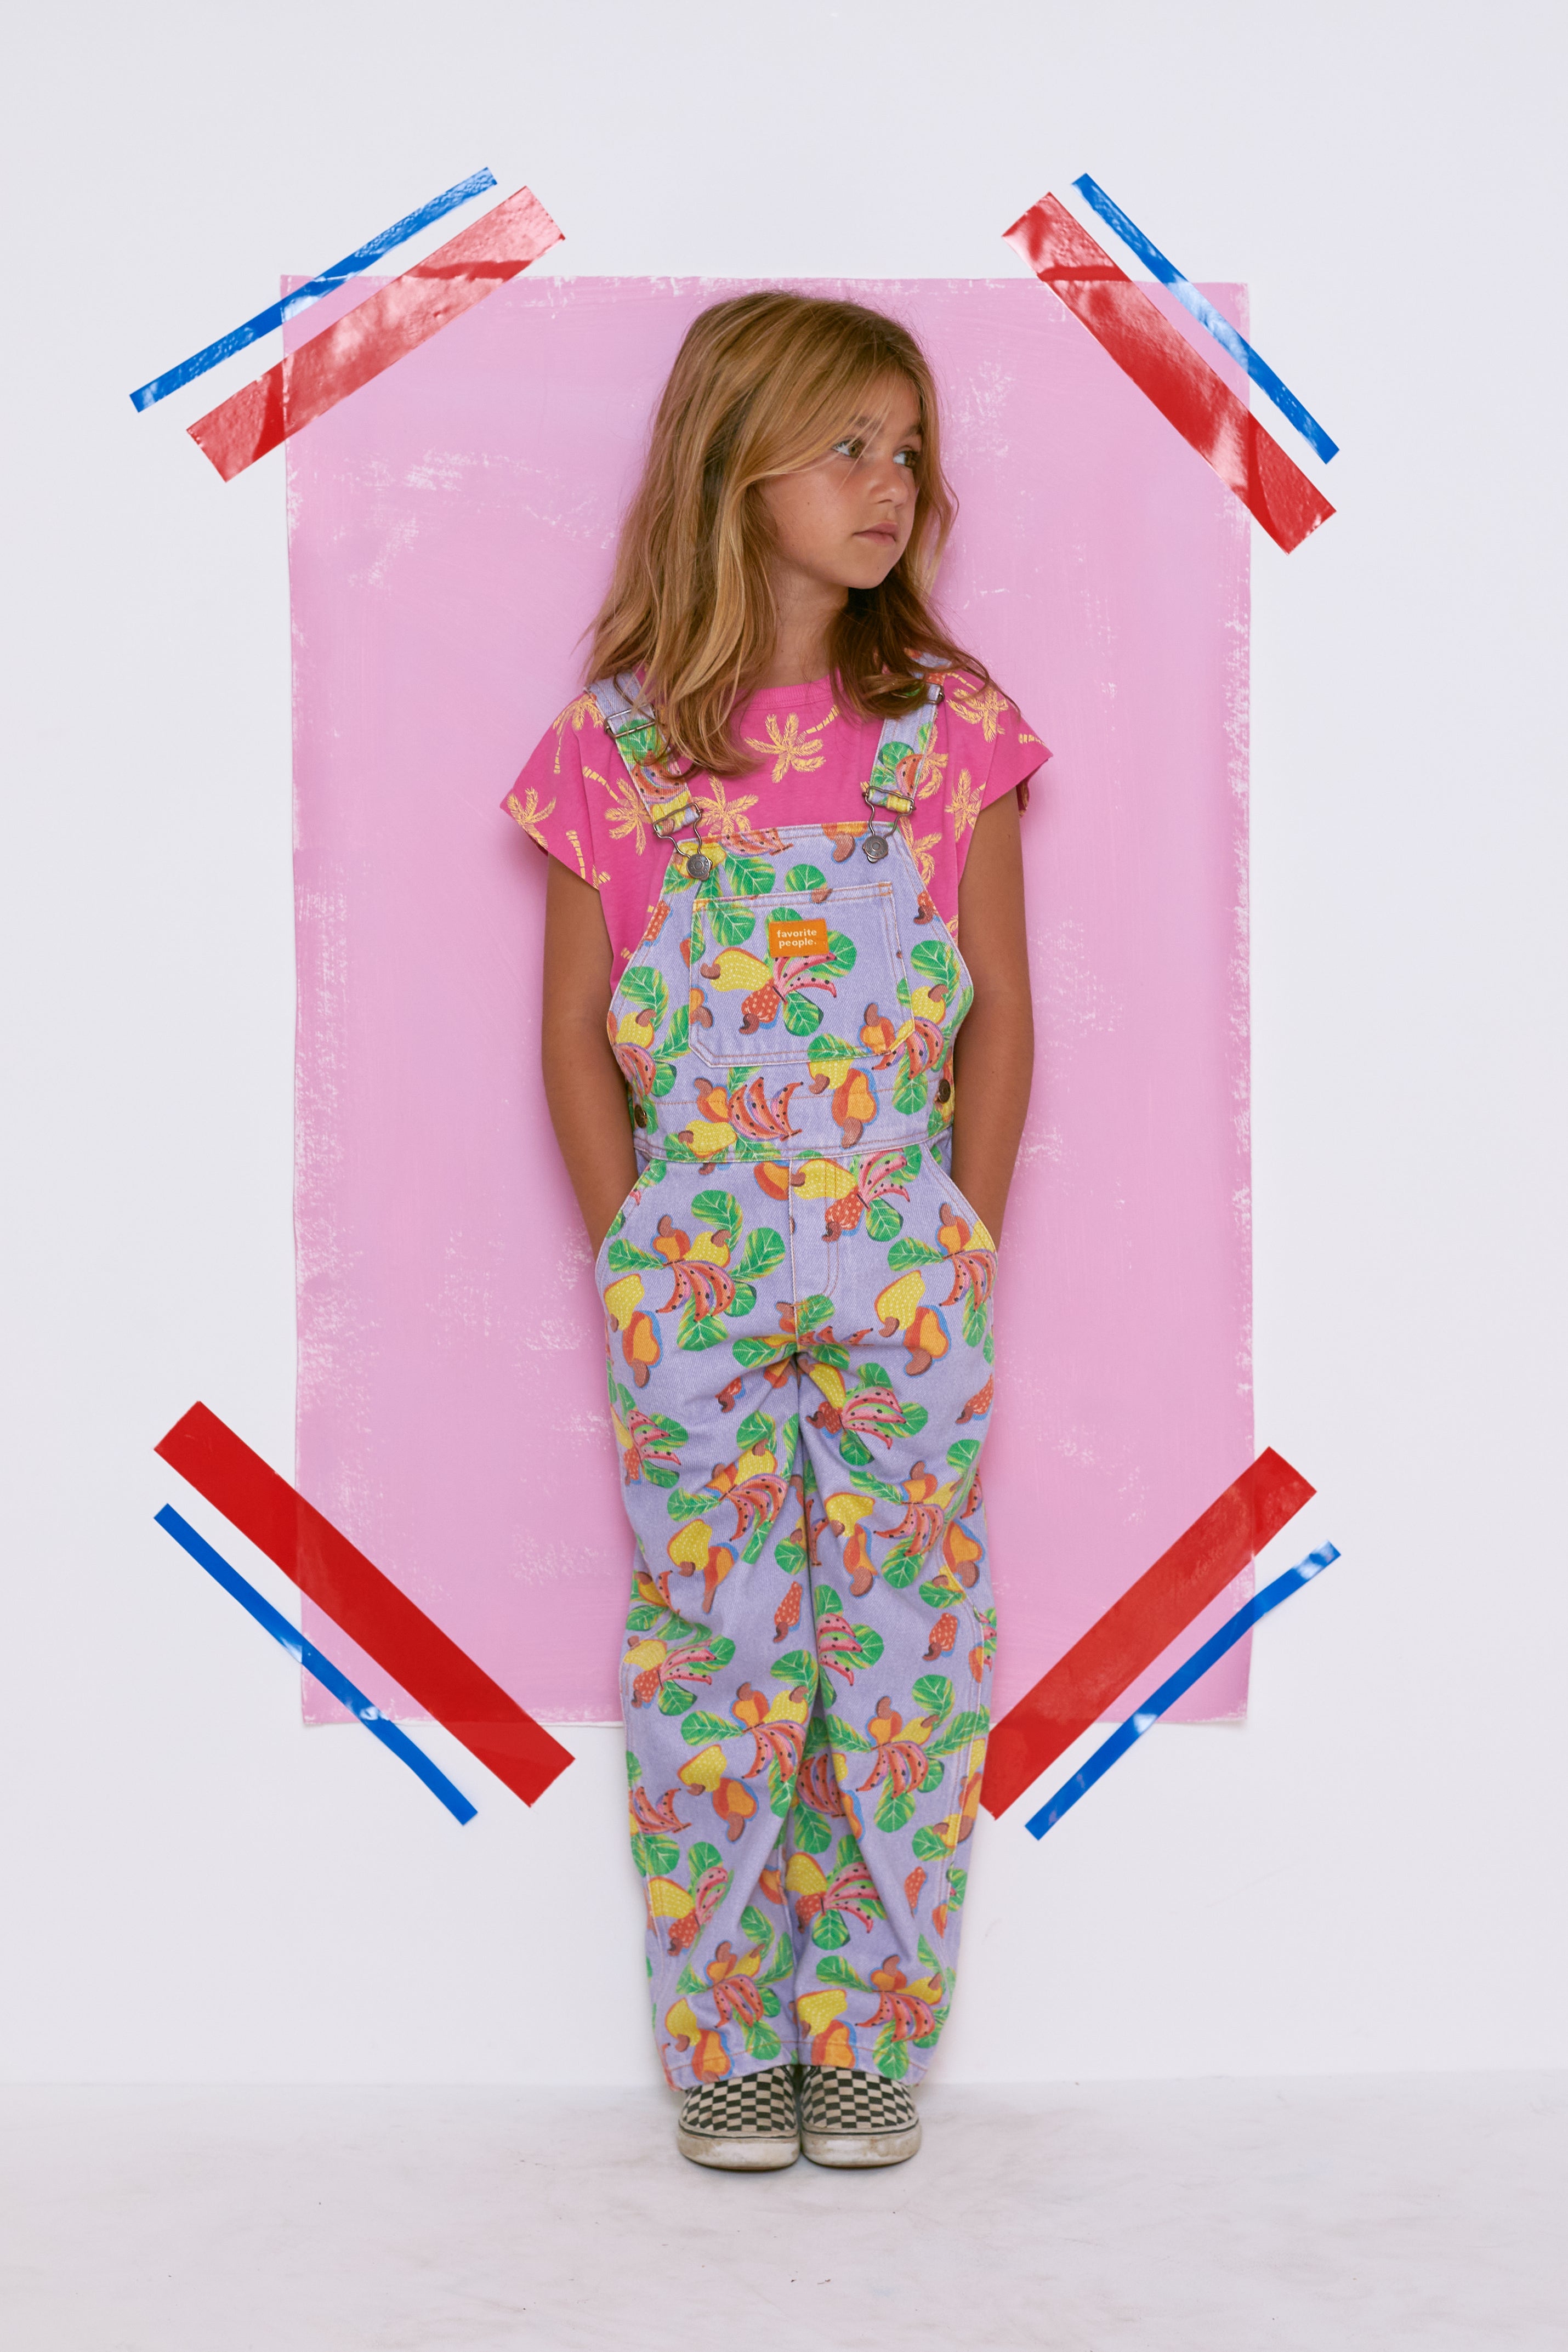 Find the coolest overalls in the world! Shop at Favorite People Store